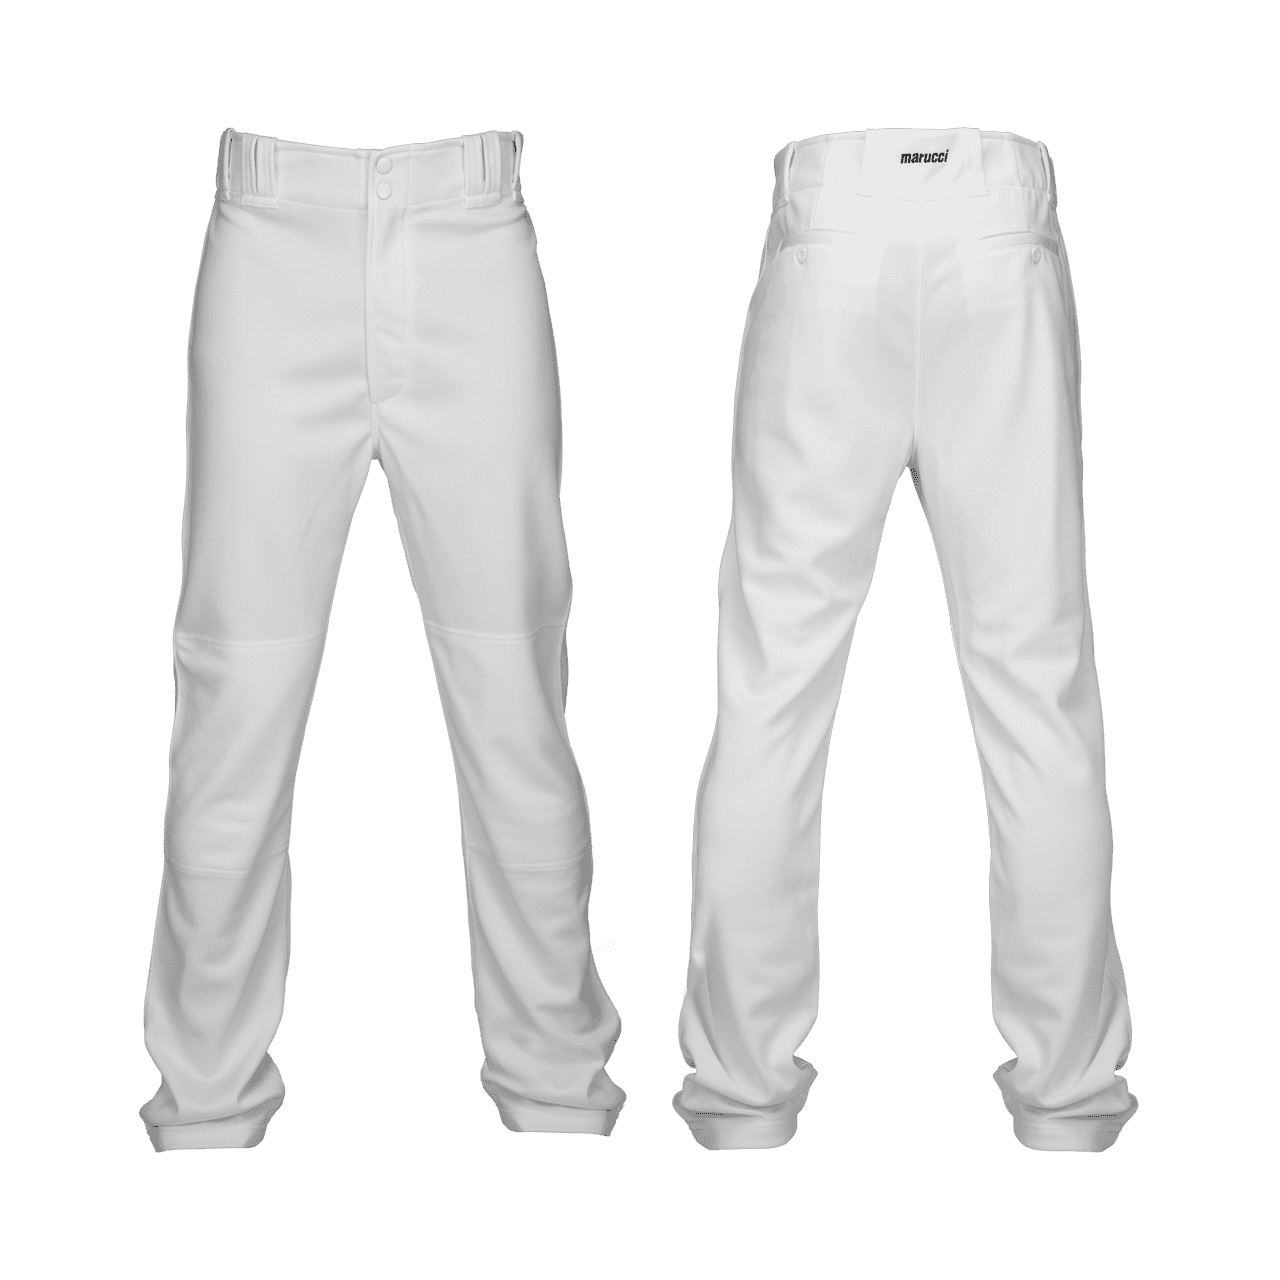 Marucci Youth Double Knit Baseball Pant - Ships Directly From Marucci ...